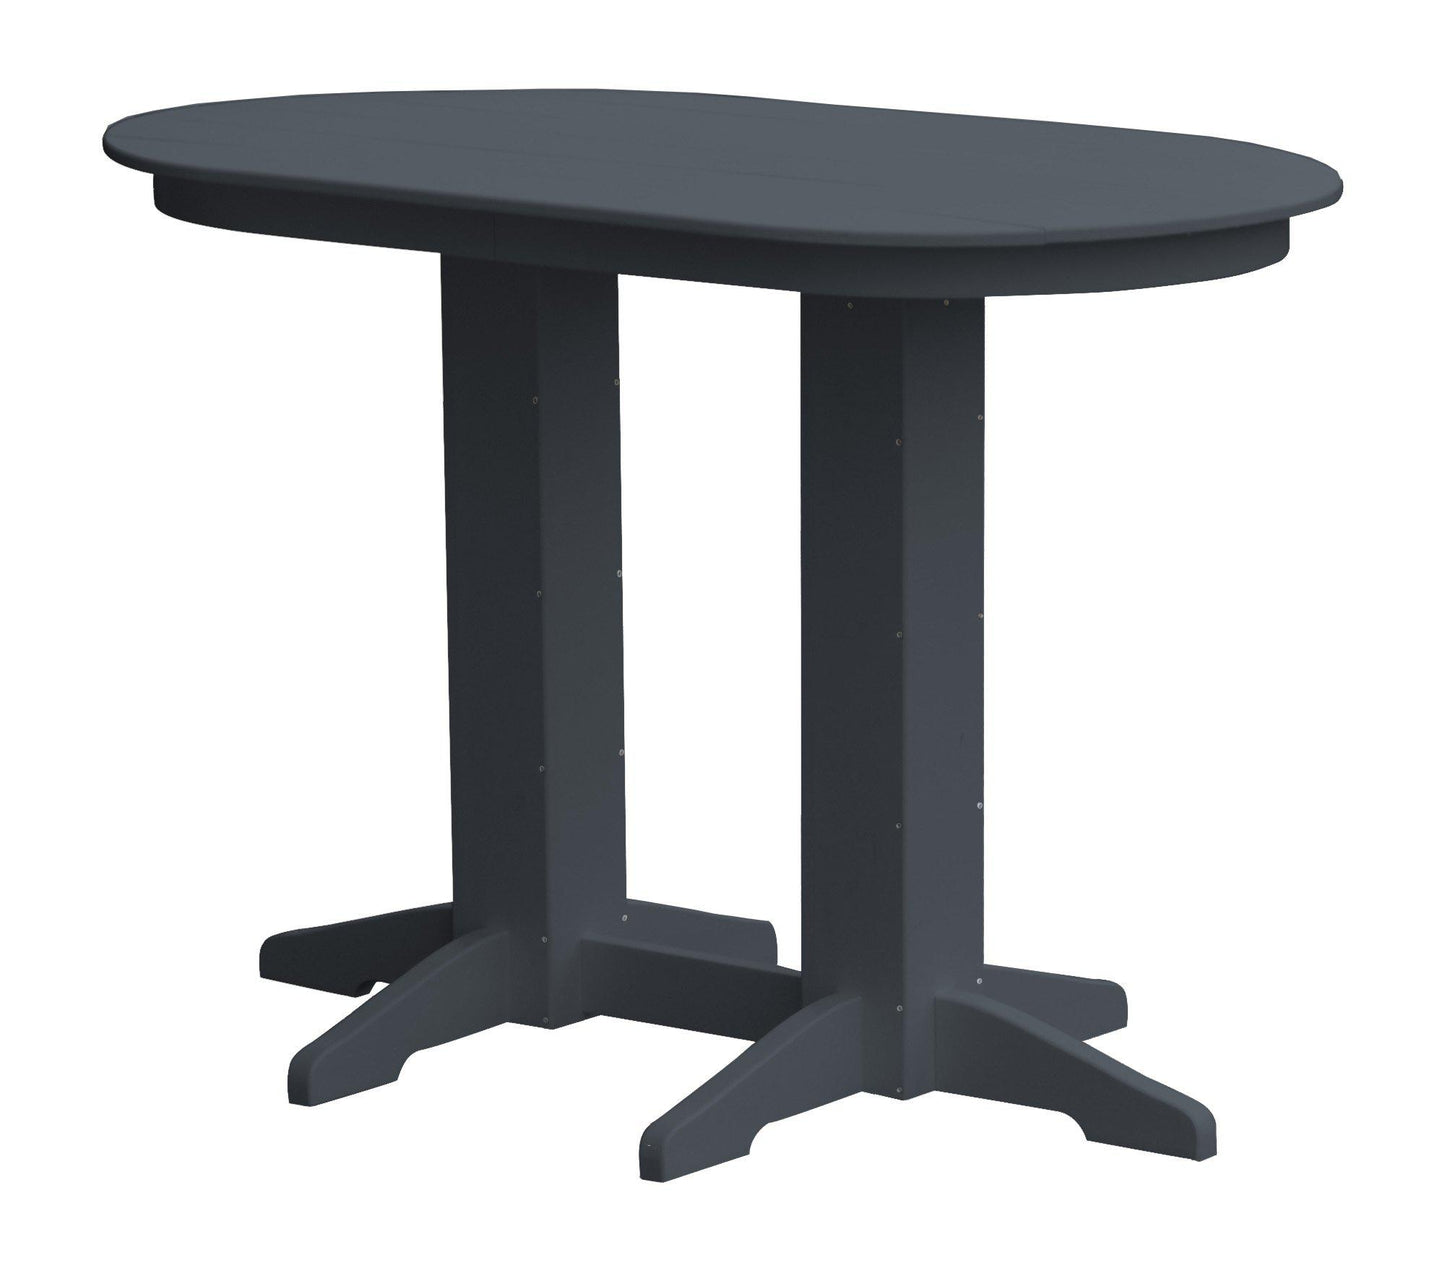 A&L Furniture Recycled Plastic 5' Oval Bar Table - Dark Gray